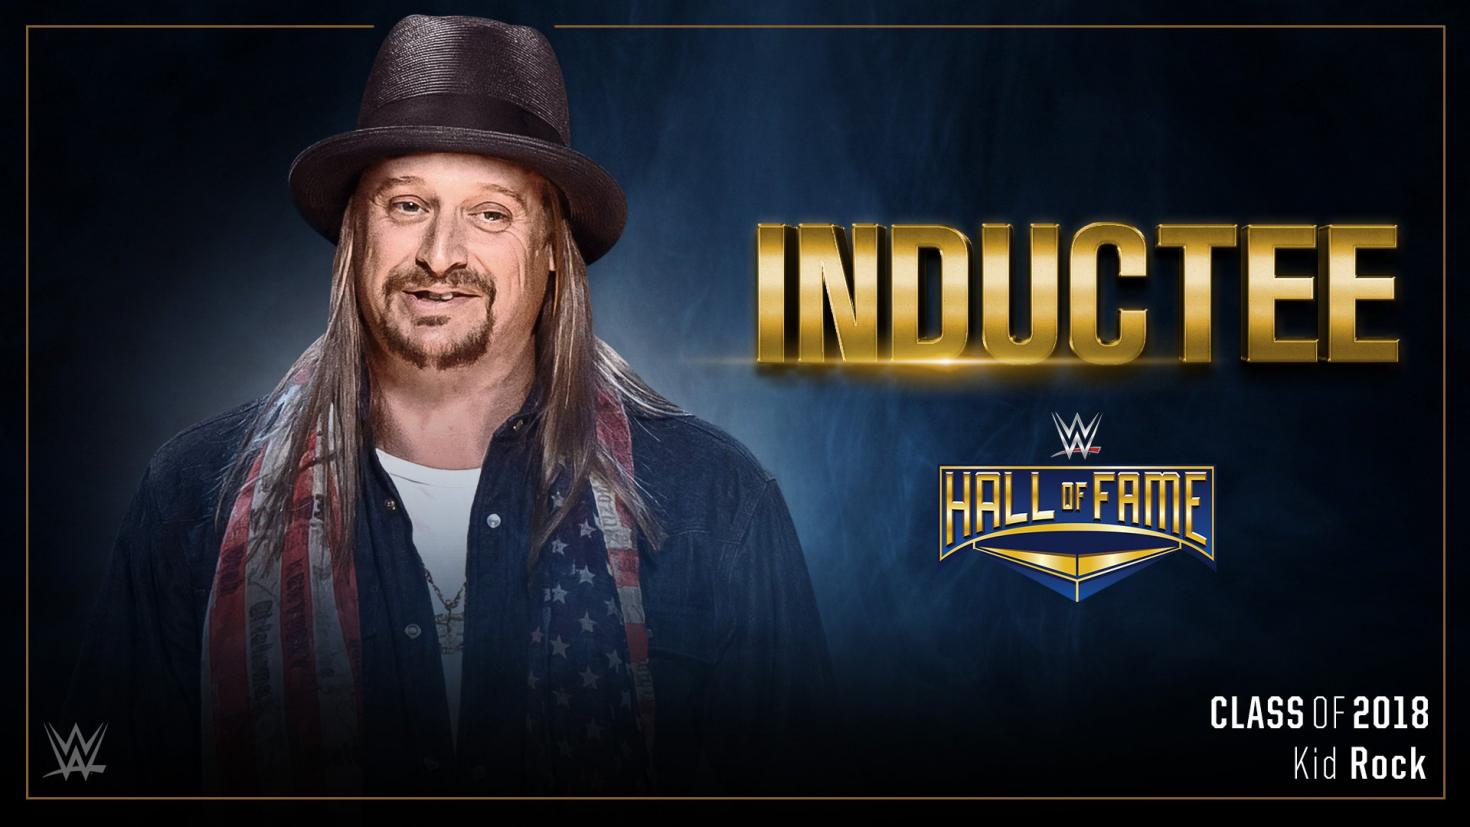 Kid Rock Confirmed for 2018 WWE Hall of Fame Class